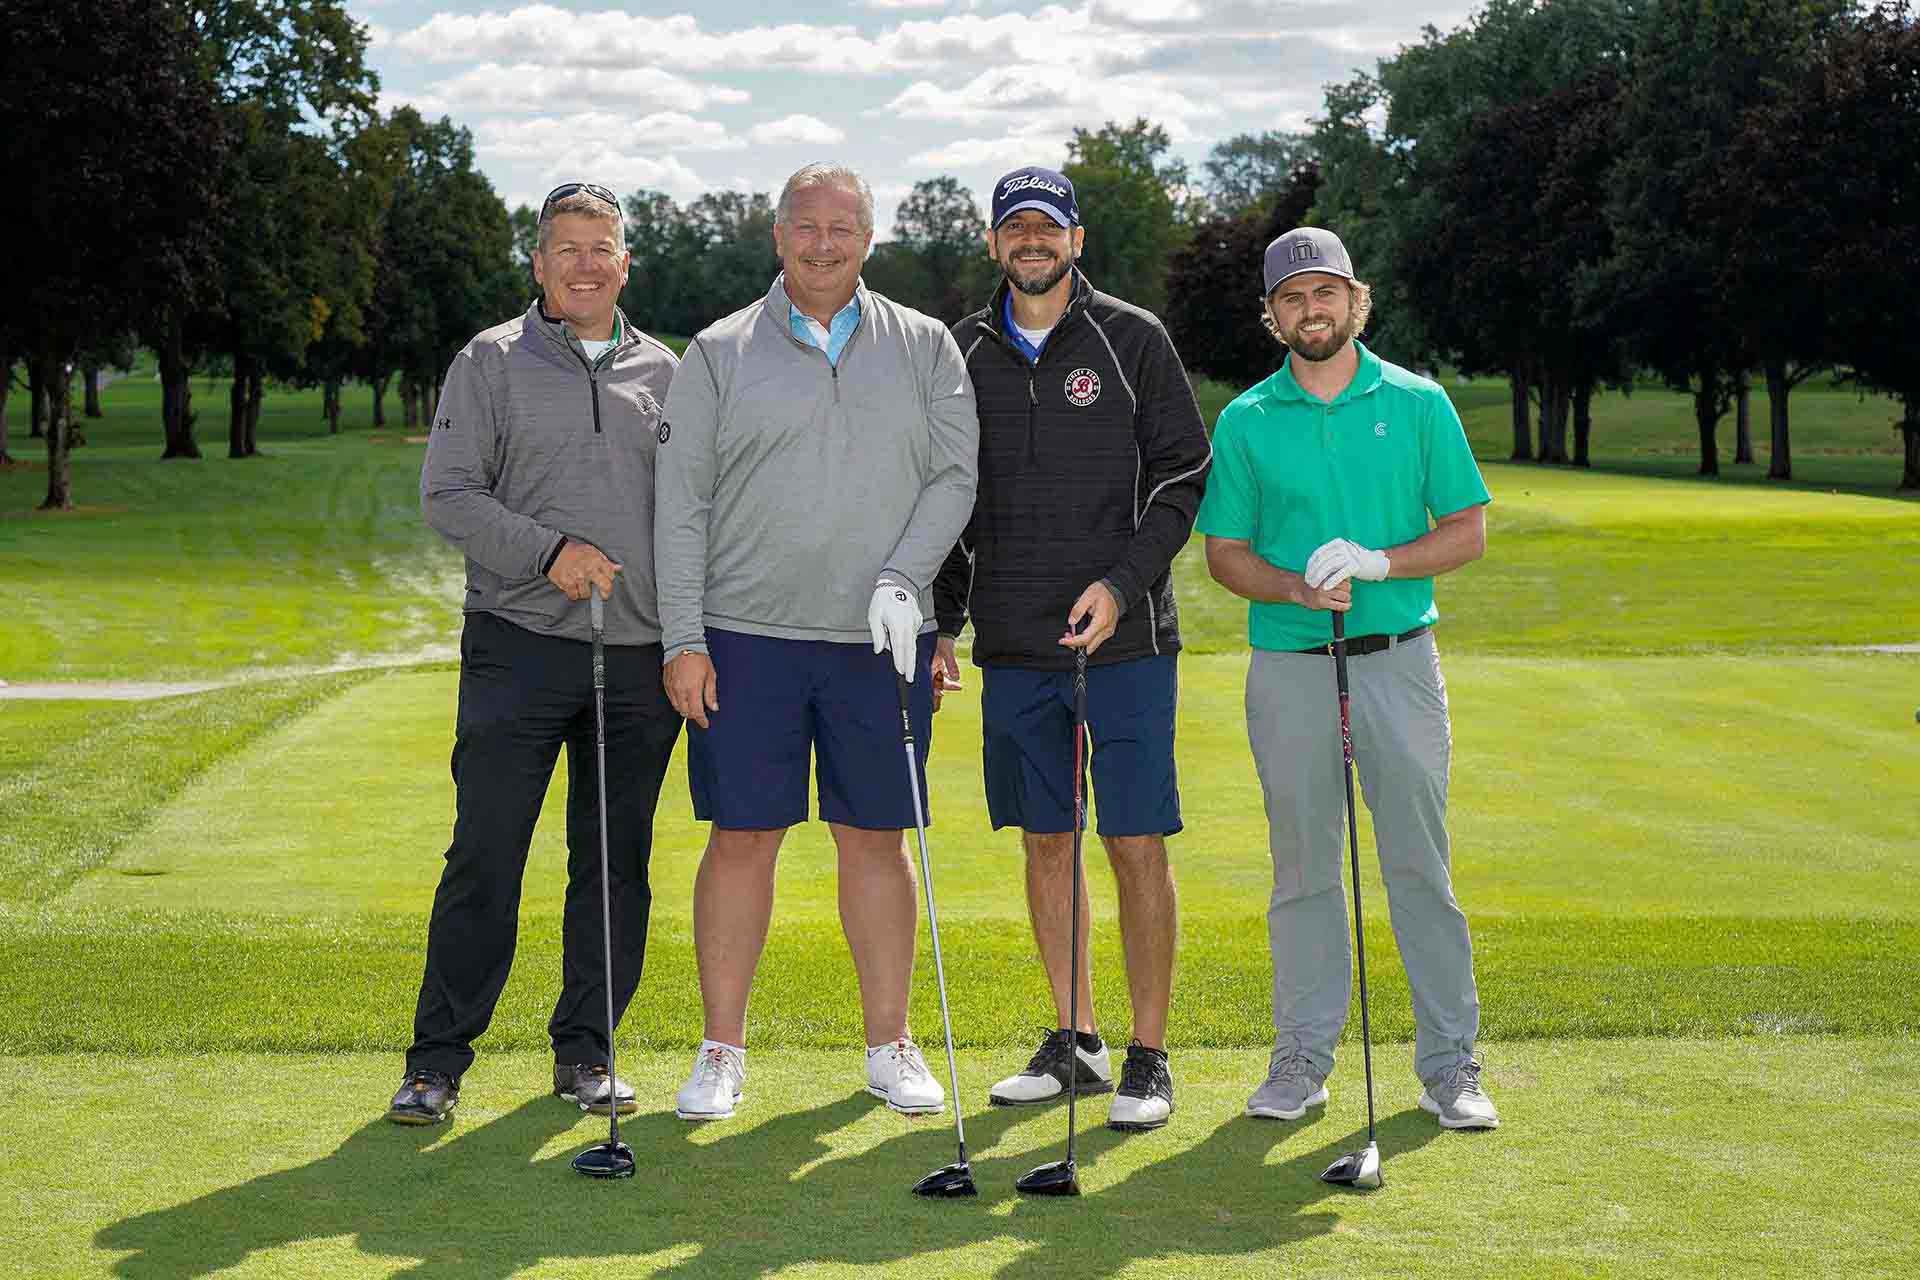 2020-endownment-classic-four-people-smile-for-photo-holding-golf-clubs